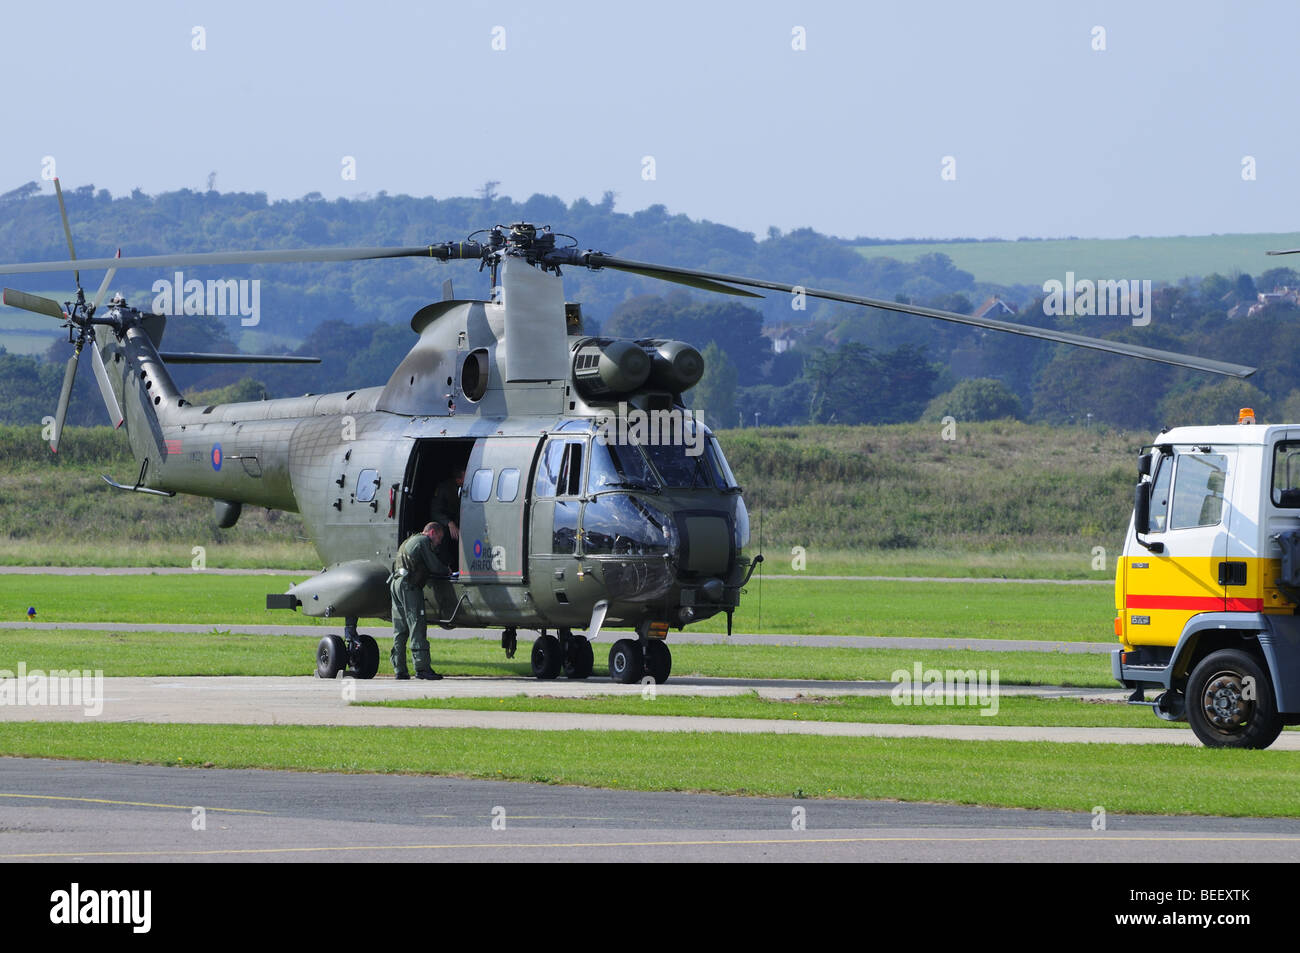 RAF ,Royal Air Force ,Puma Helicopter ,Refueling , Airport ,Shoreham by Sea Tanker Stock Photo